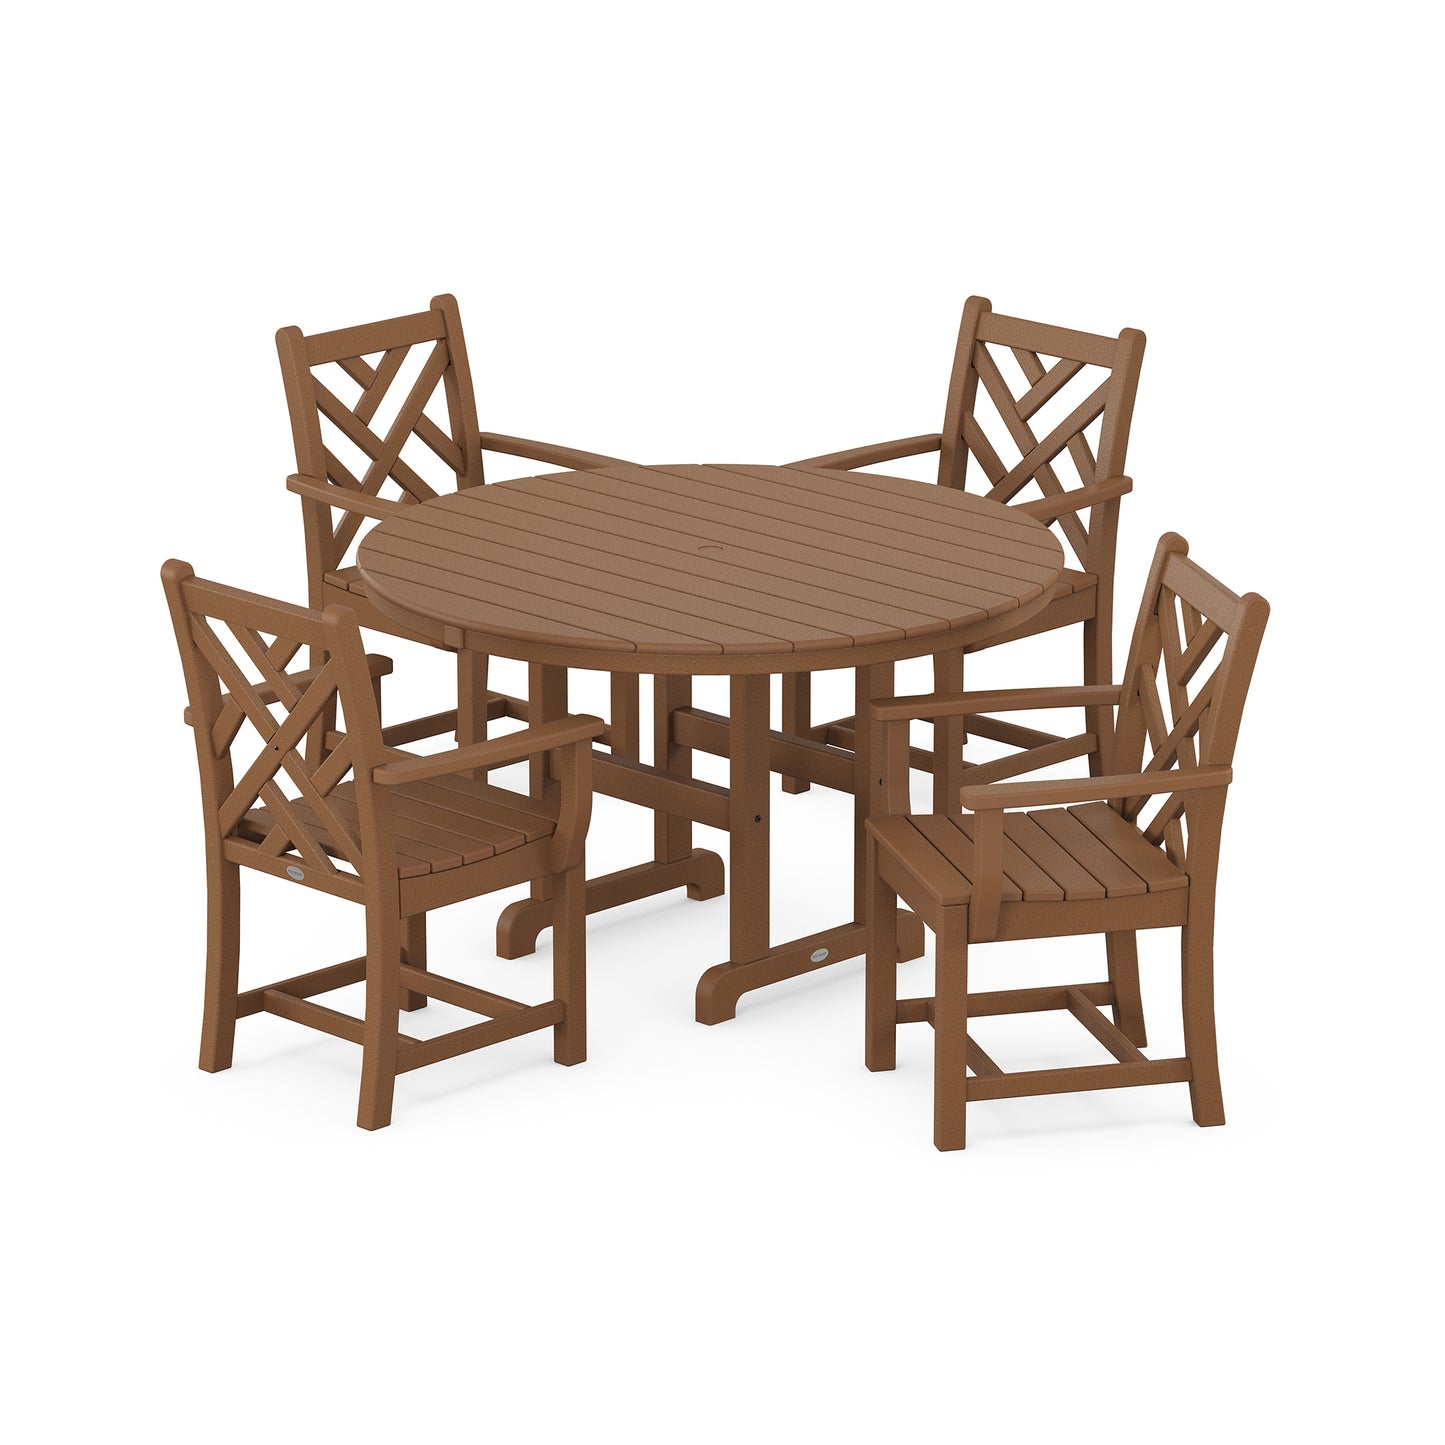 A POLYWOOD Chippendale 5-Piece Dining Set featuring a round table and four chairs made of brown Polywood® recycled lumber, designed with a slatted top and Chippendale patterns on the chair backs, isolated on